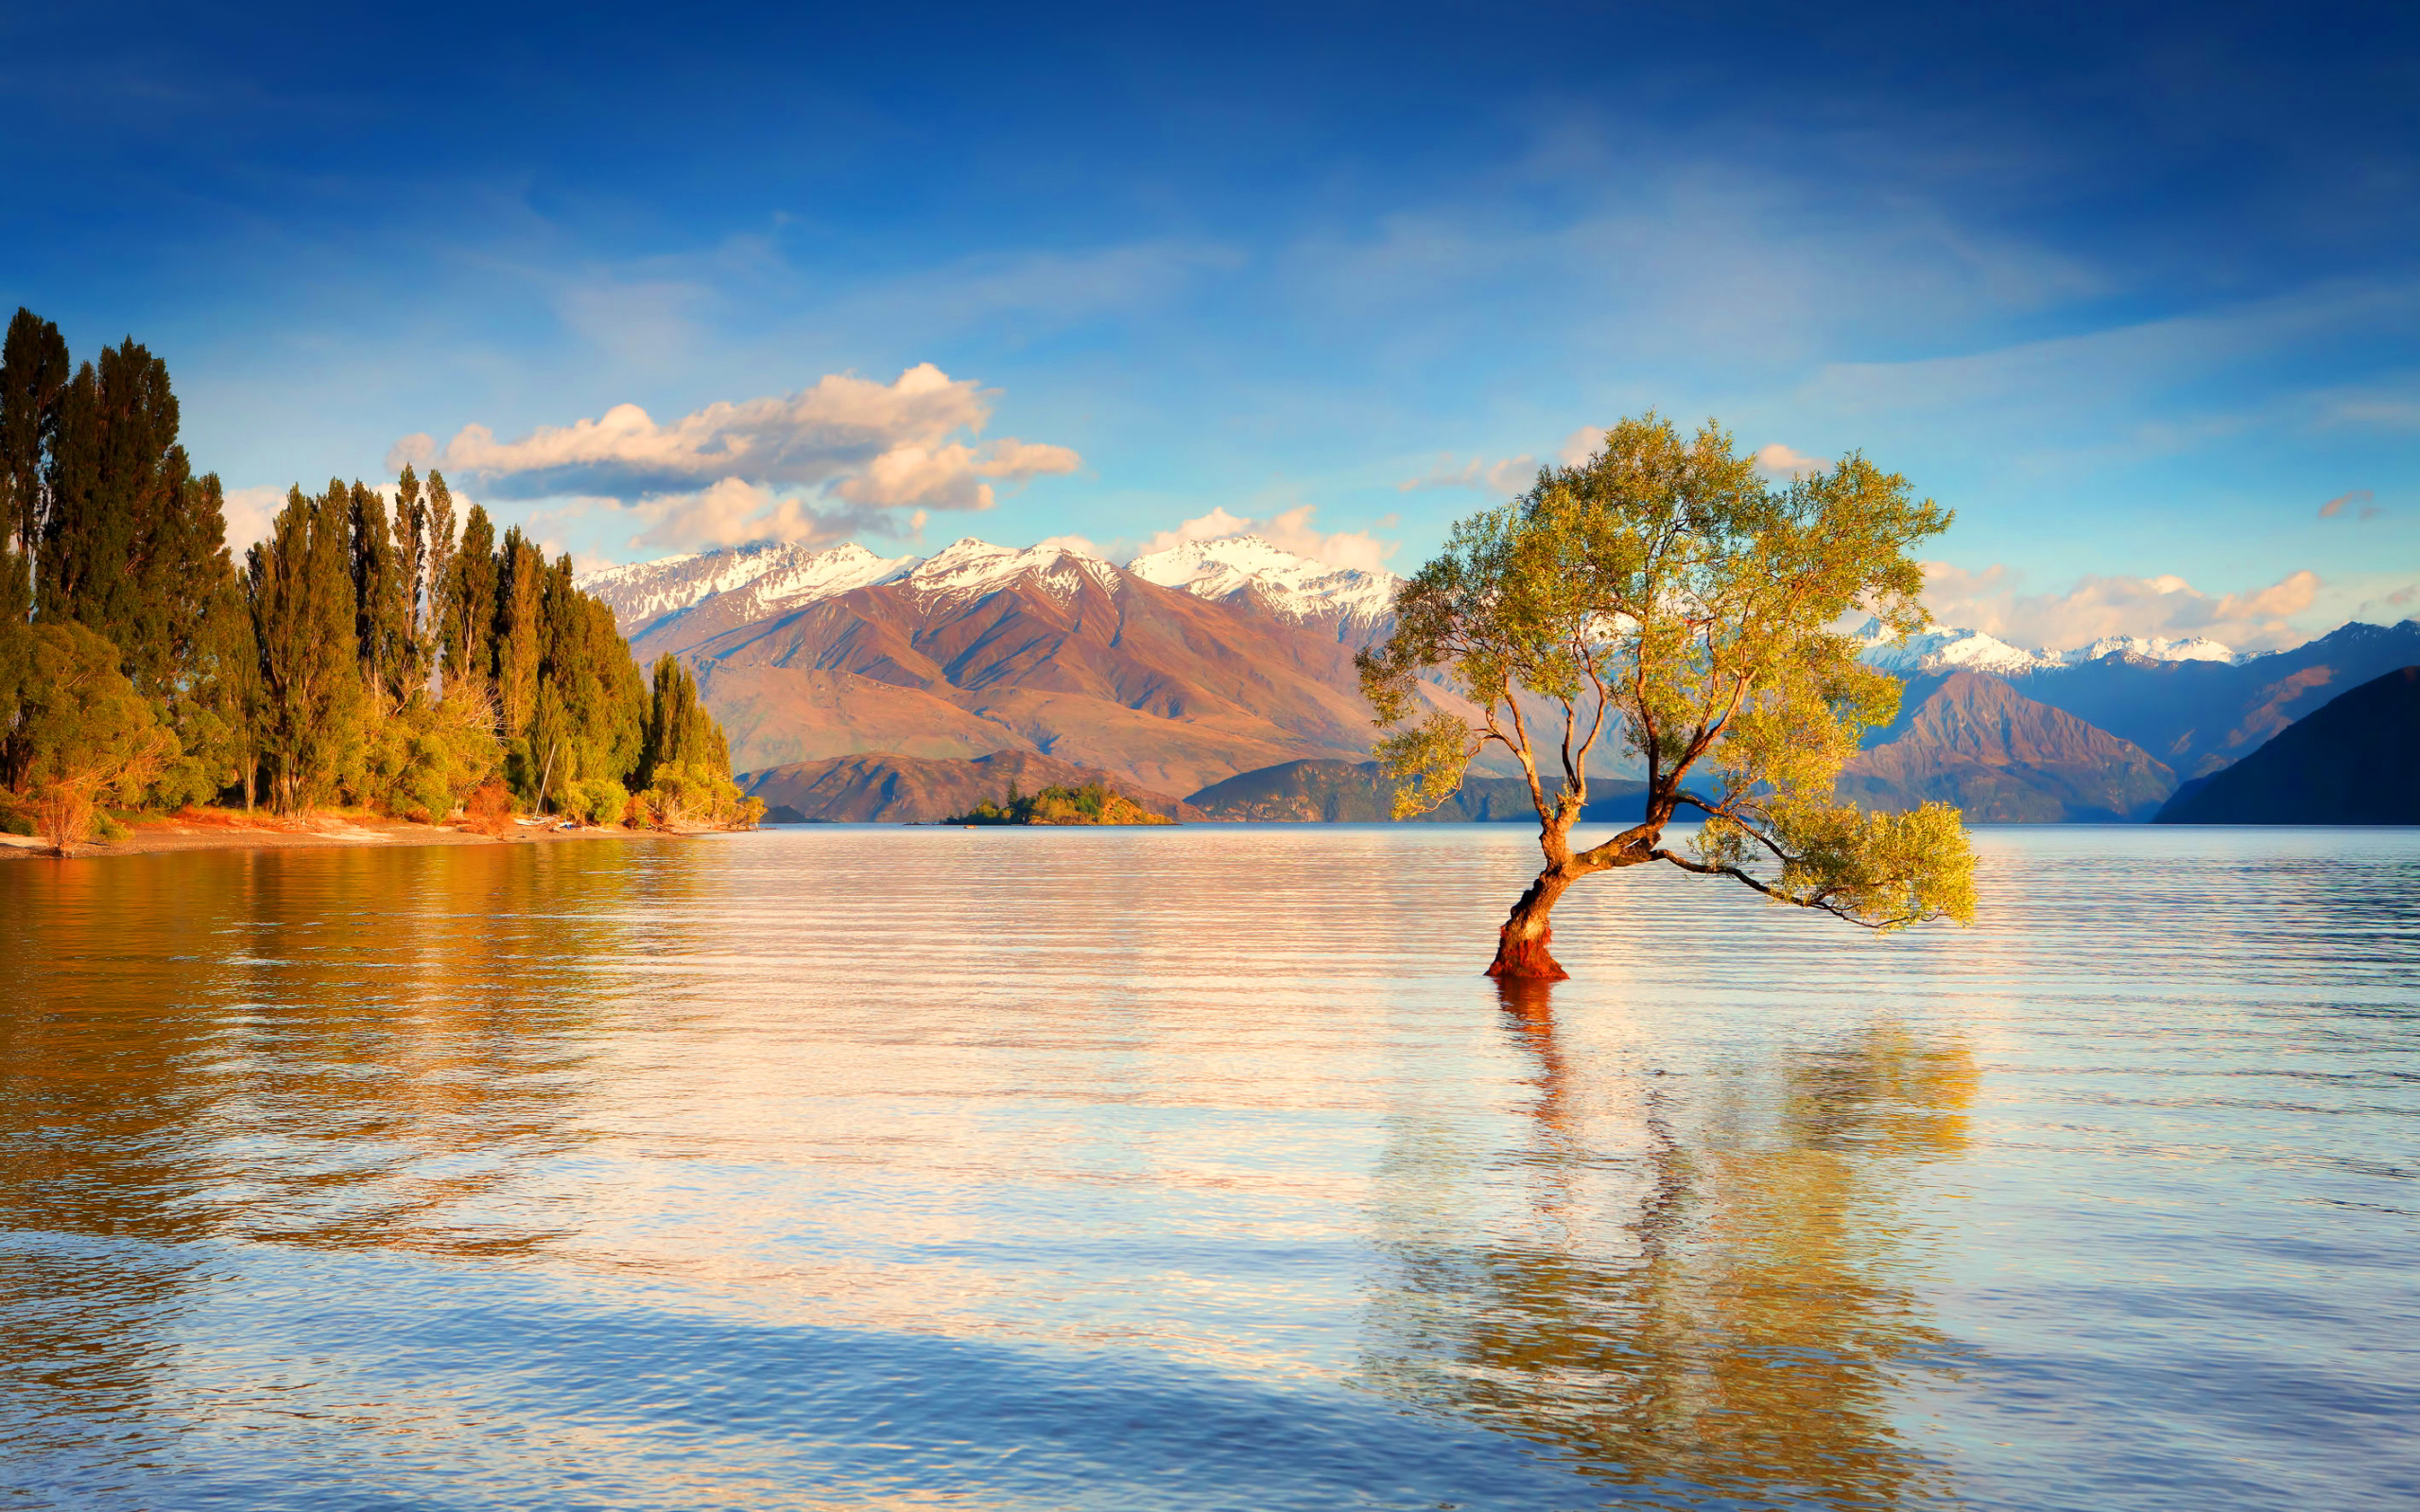 General 2560x1600 New Zealand lake snow mountains clouds snowy peak nature landscape trees